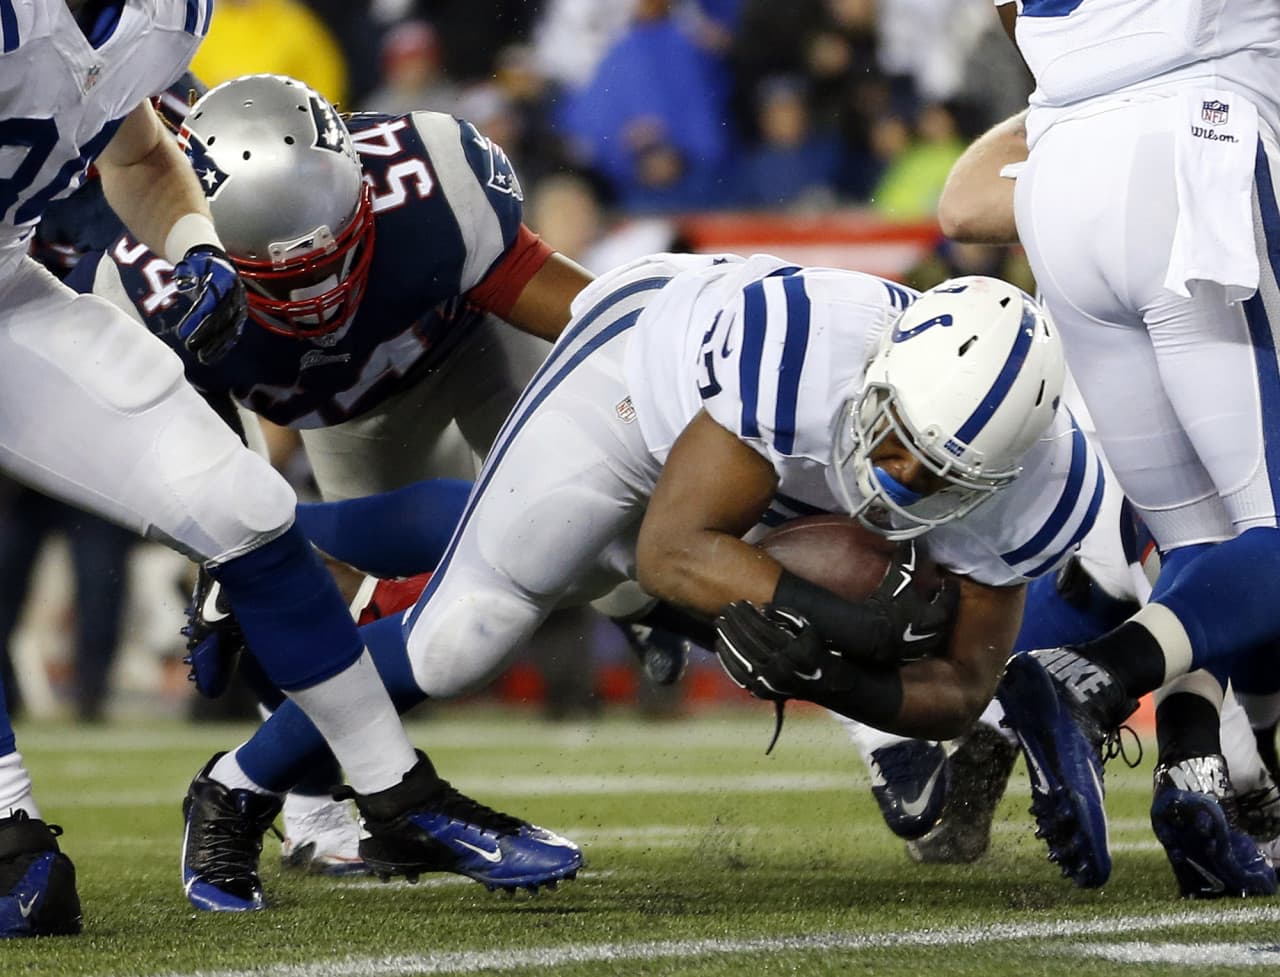 Indianapolis Colts running back Zurlon Tipton (37) scores on a one-yard touchdown run past the Patriots outside linebacker Dont'a Hightower (54) during the first half of the AFC Championship. (Julio Cortez/AP)